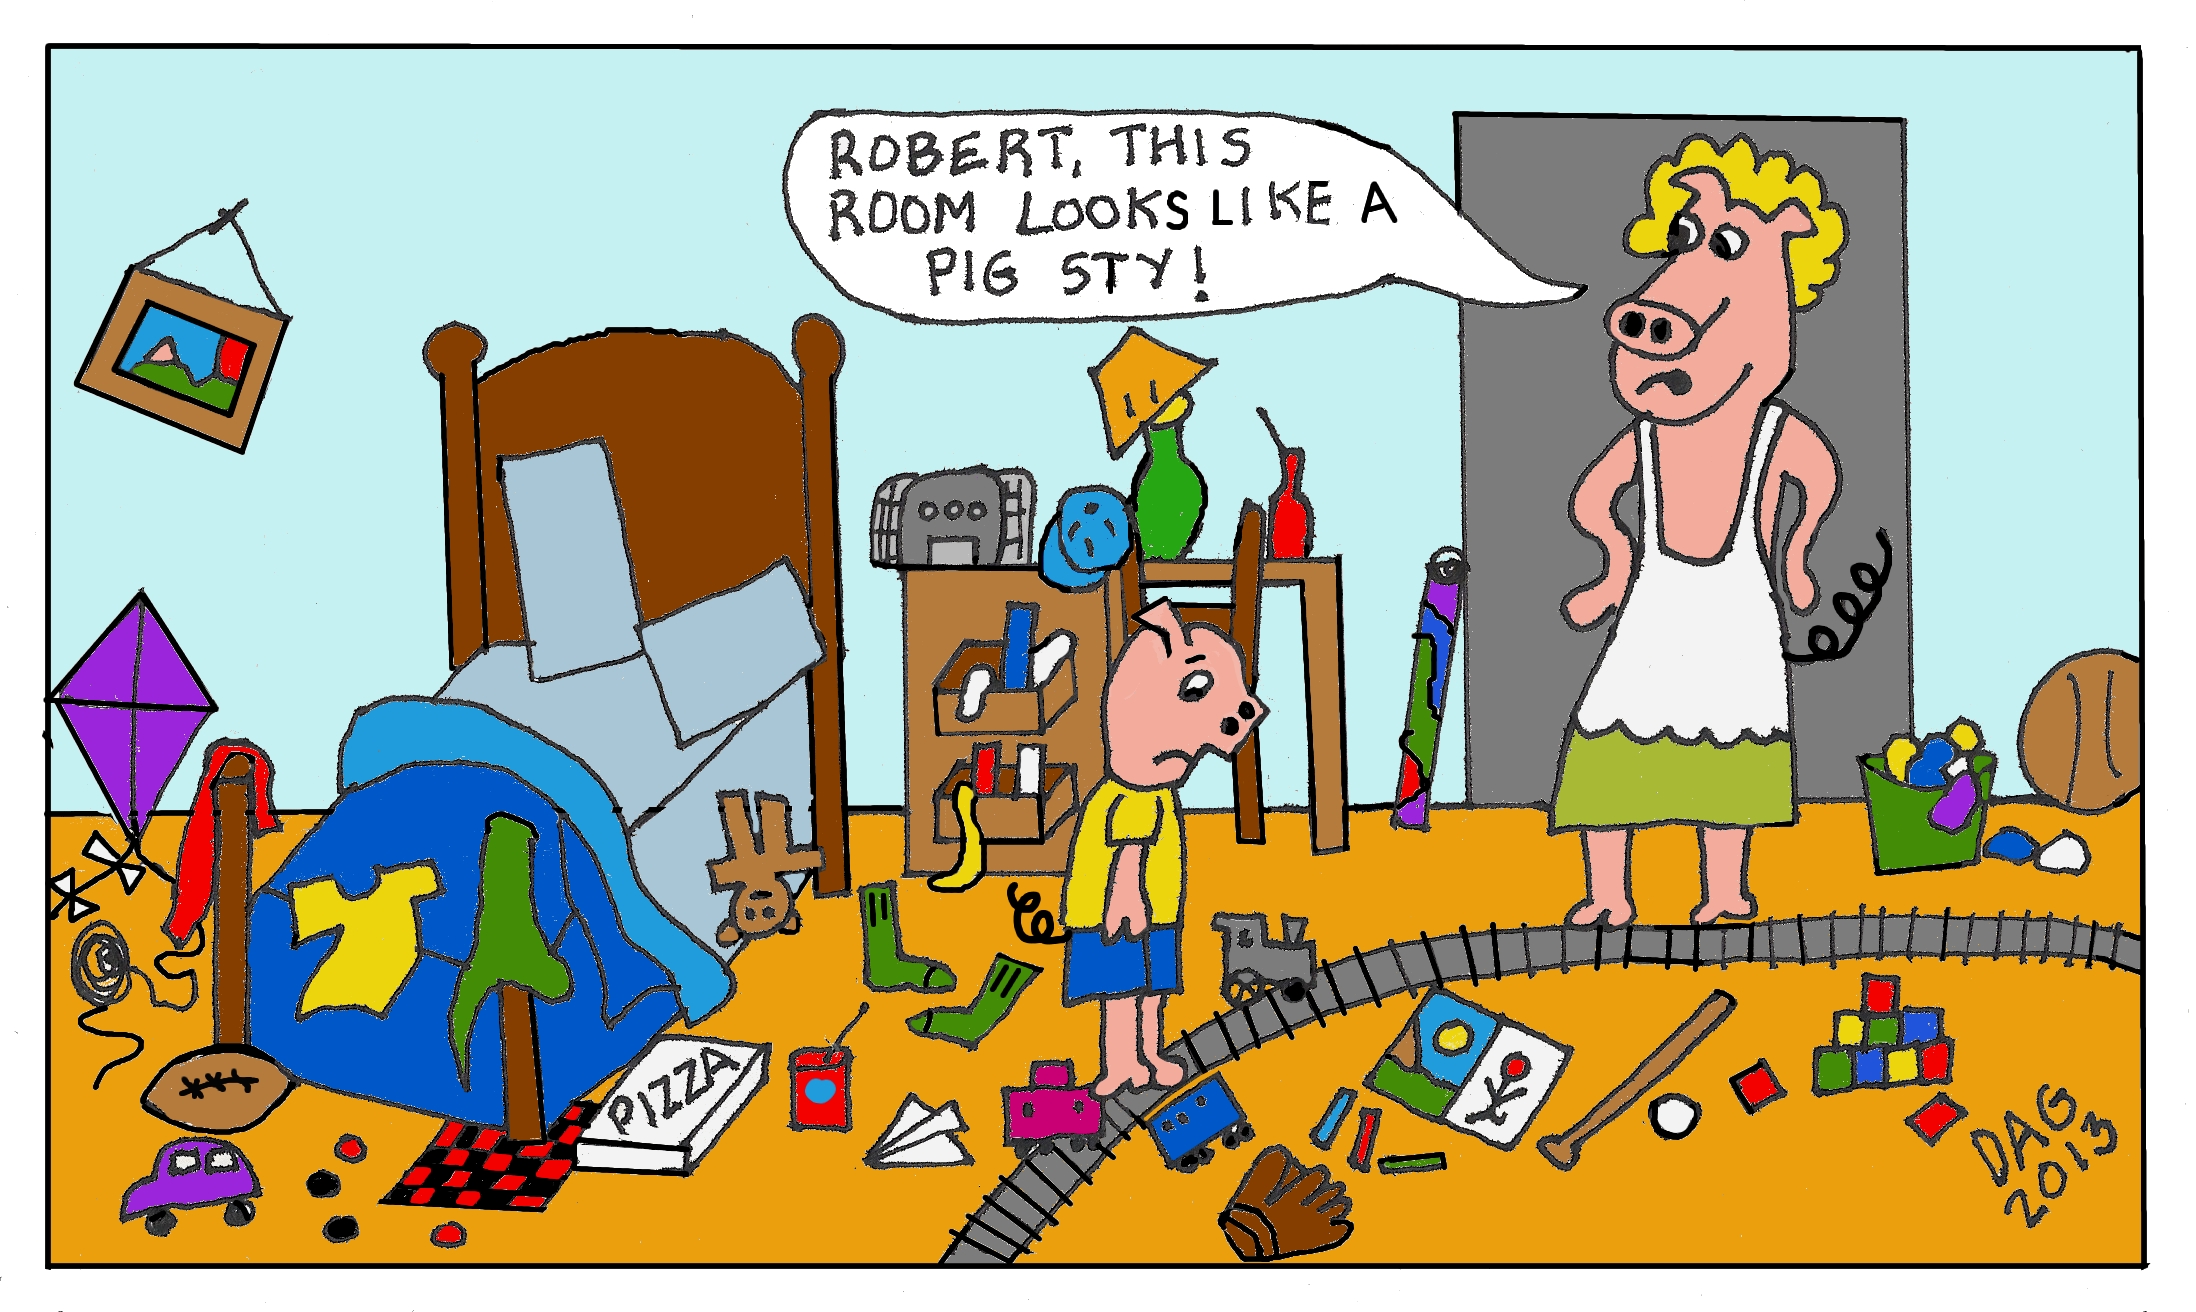 Clean up room. Tidy Room and messy Room. Tidy Room cartoon. Clean your Room. To tidy the Room.